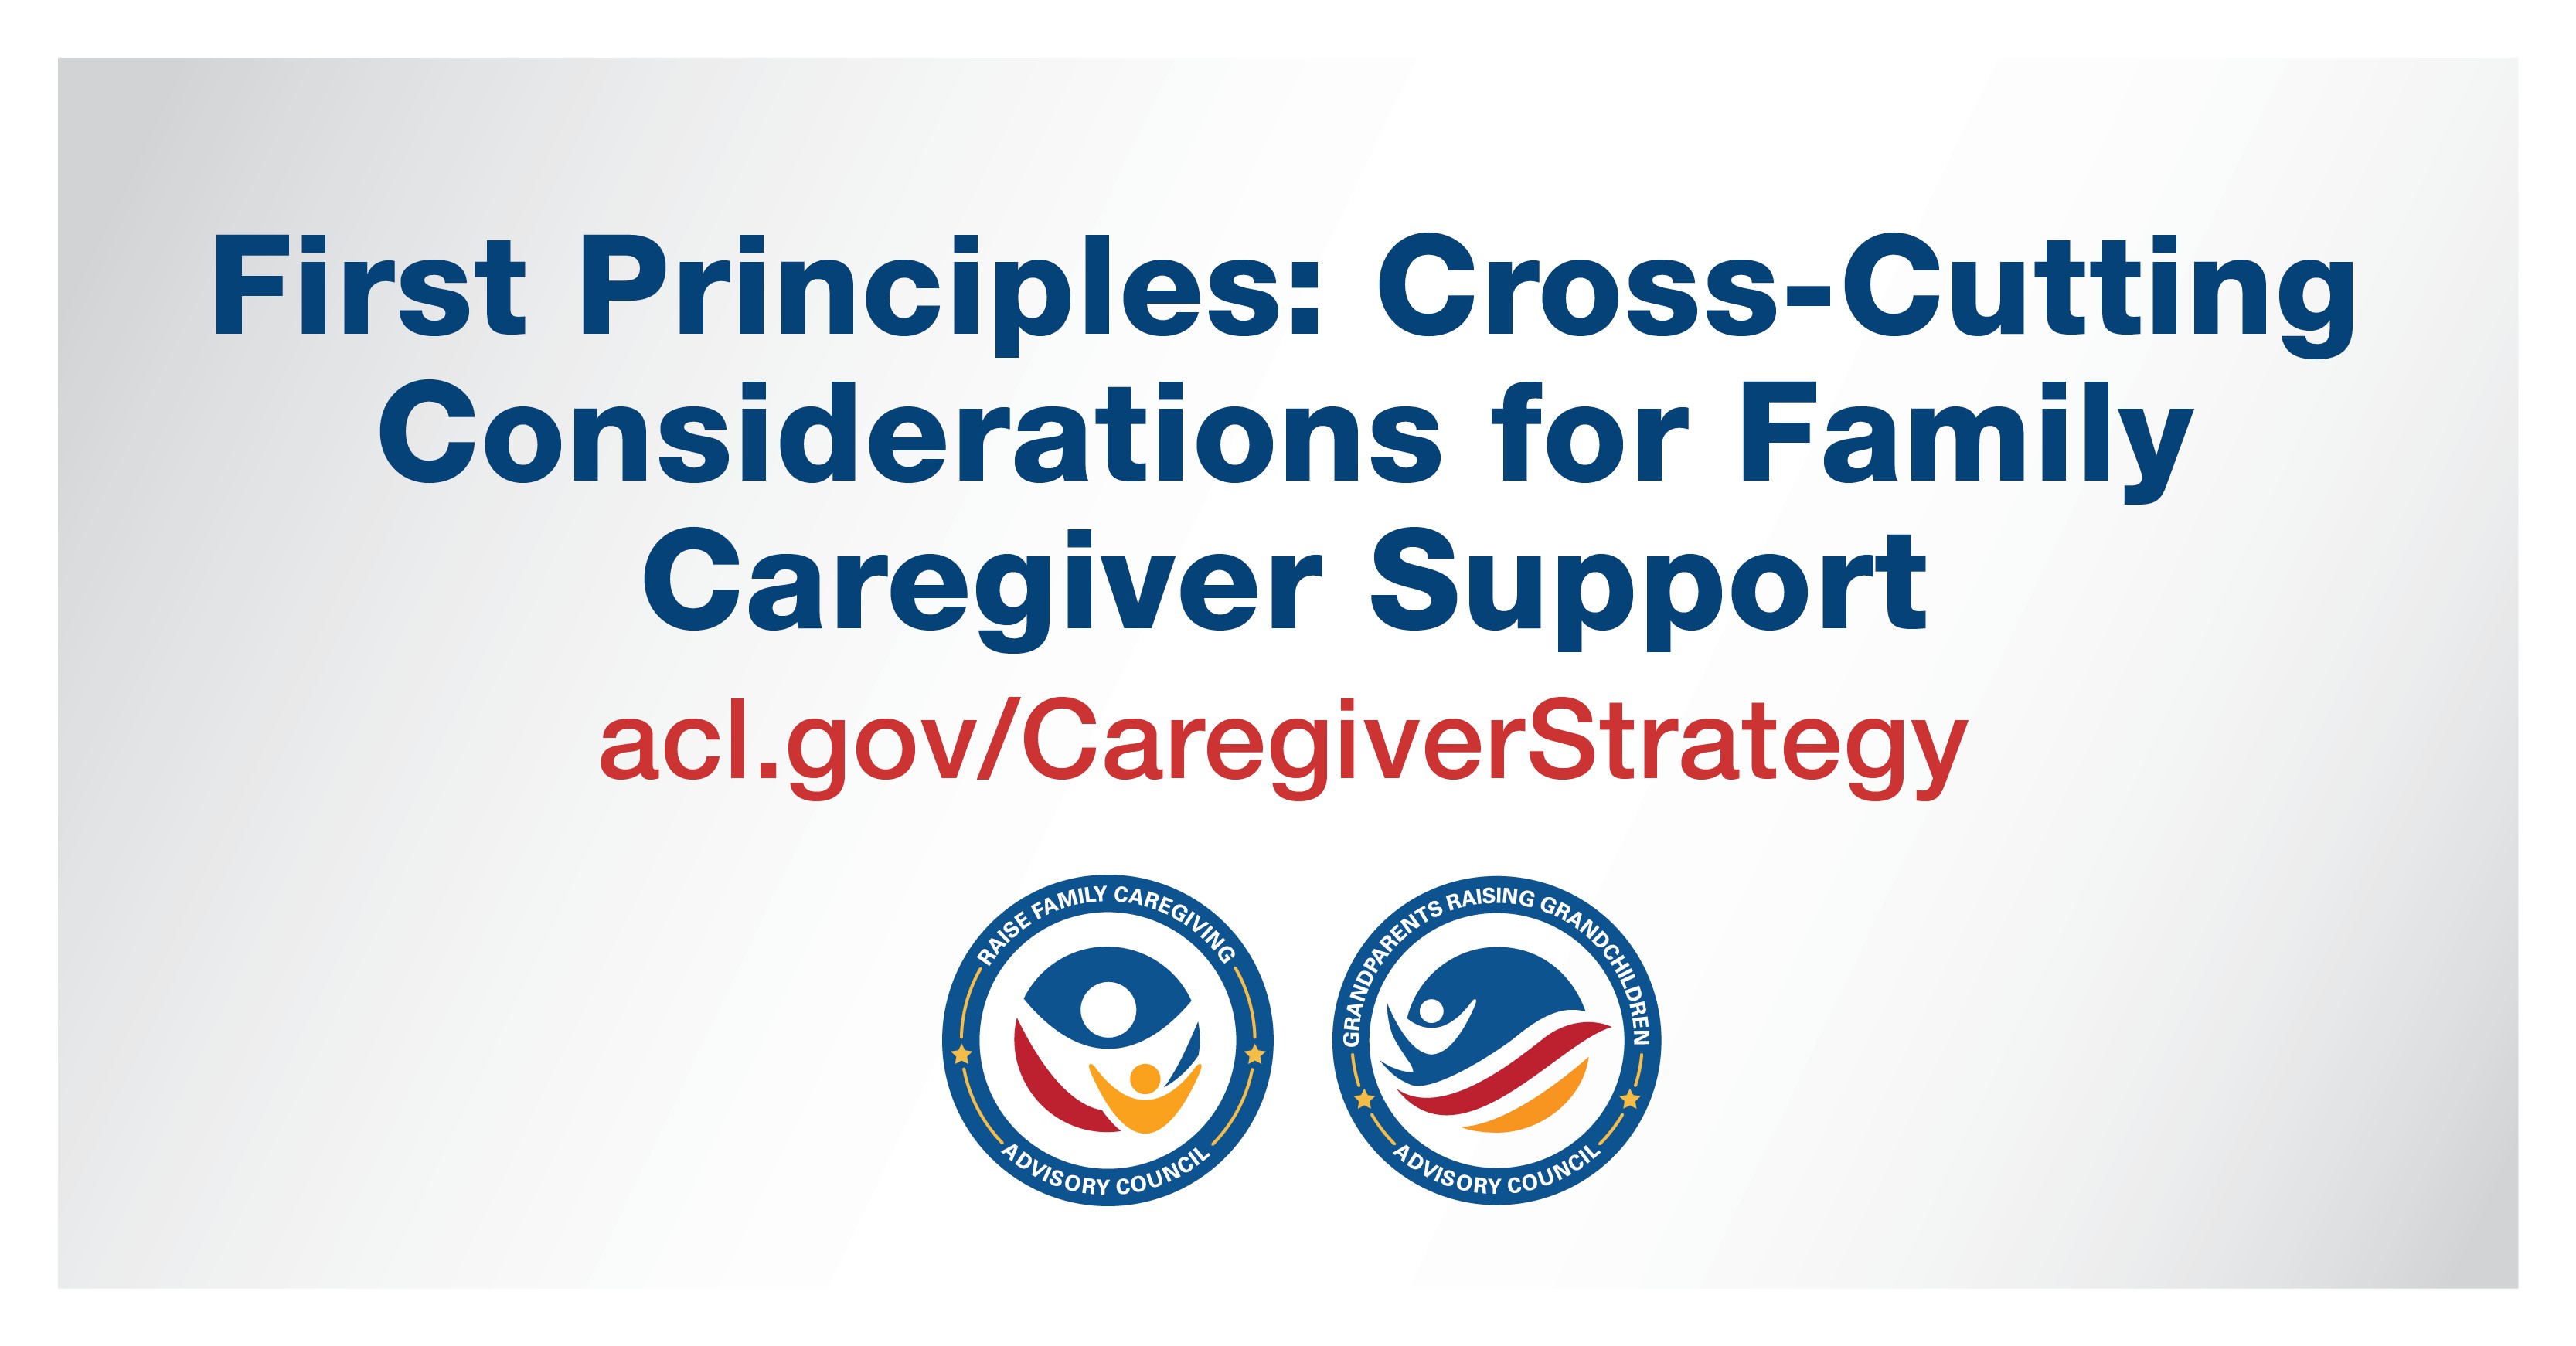 First Principles: Cross-Cutting Considerations for Family Caregiver Support acl.gov/CaregiverStrategy